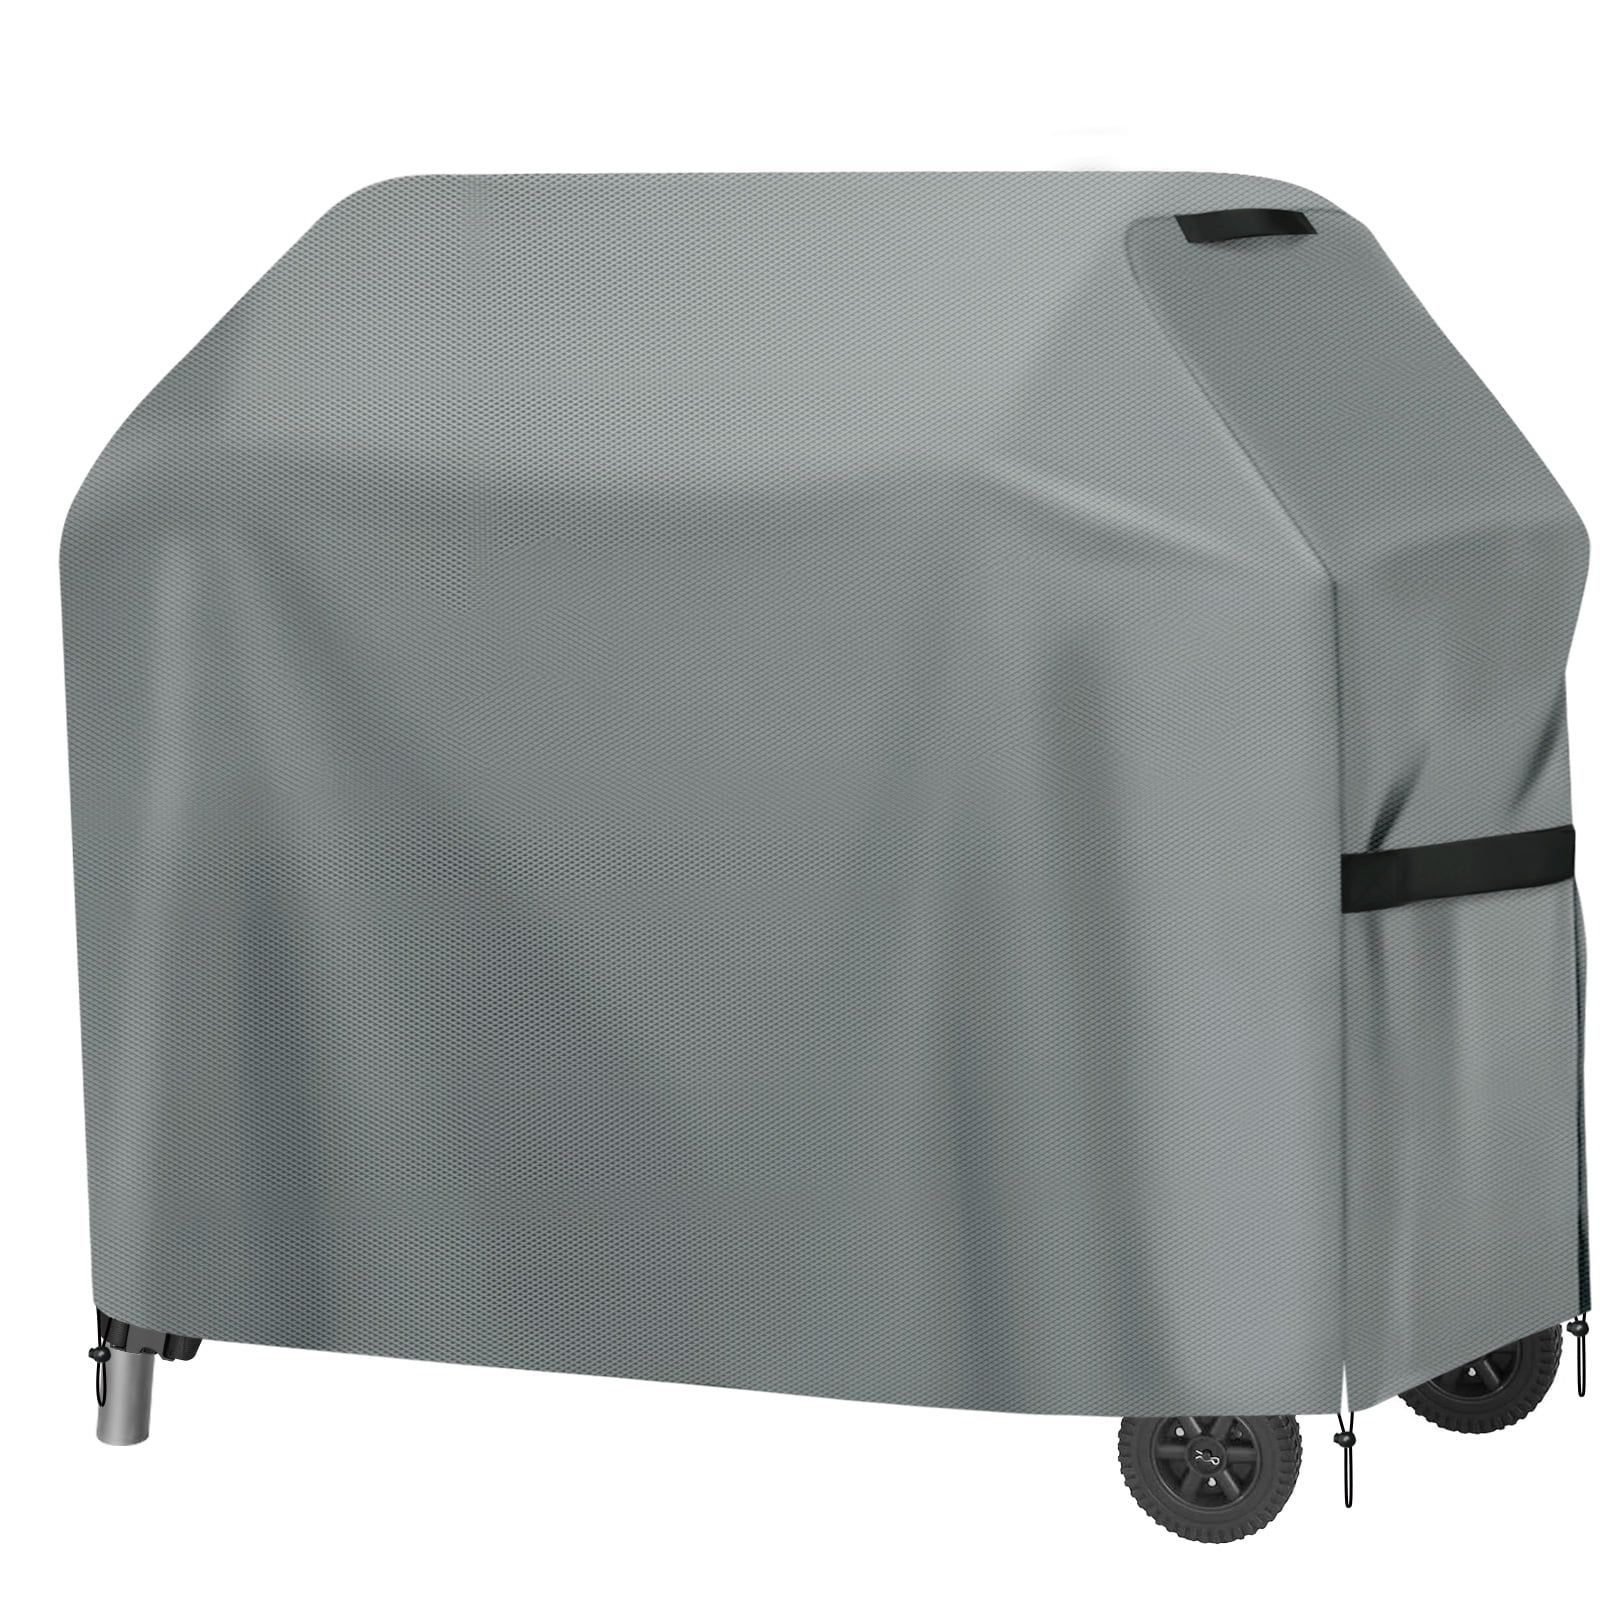 Weber BBQ Gas Grill Cover 57" Genesis Spirit Series Outdoor Barbeque Heavy Duty 